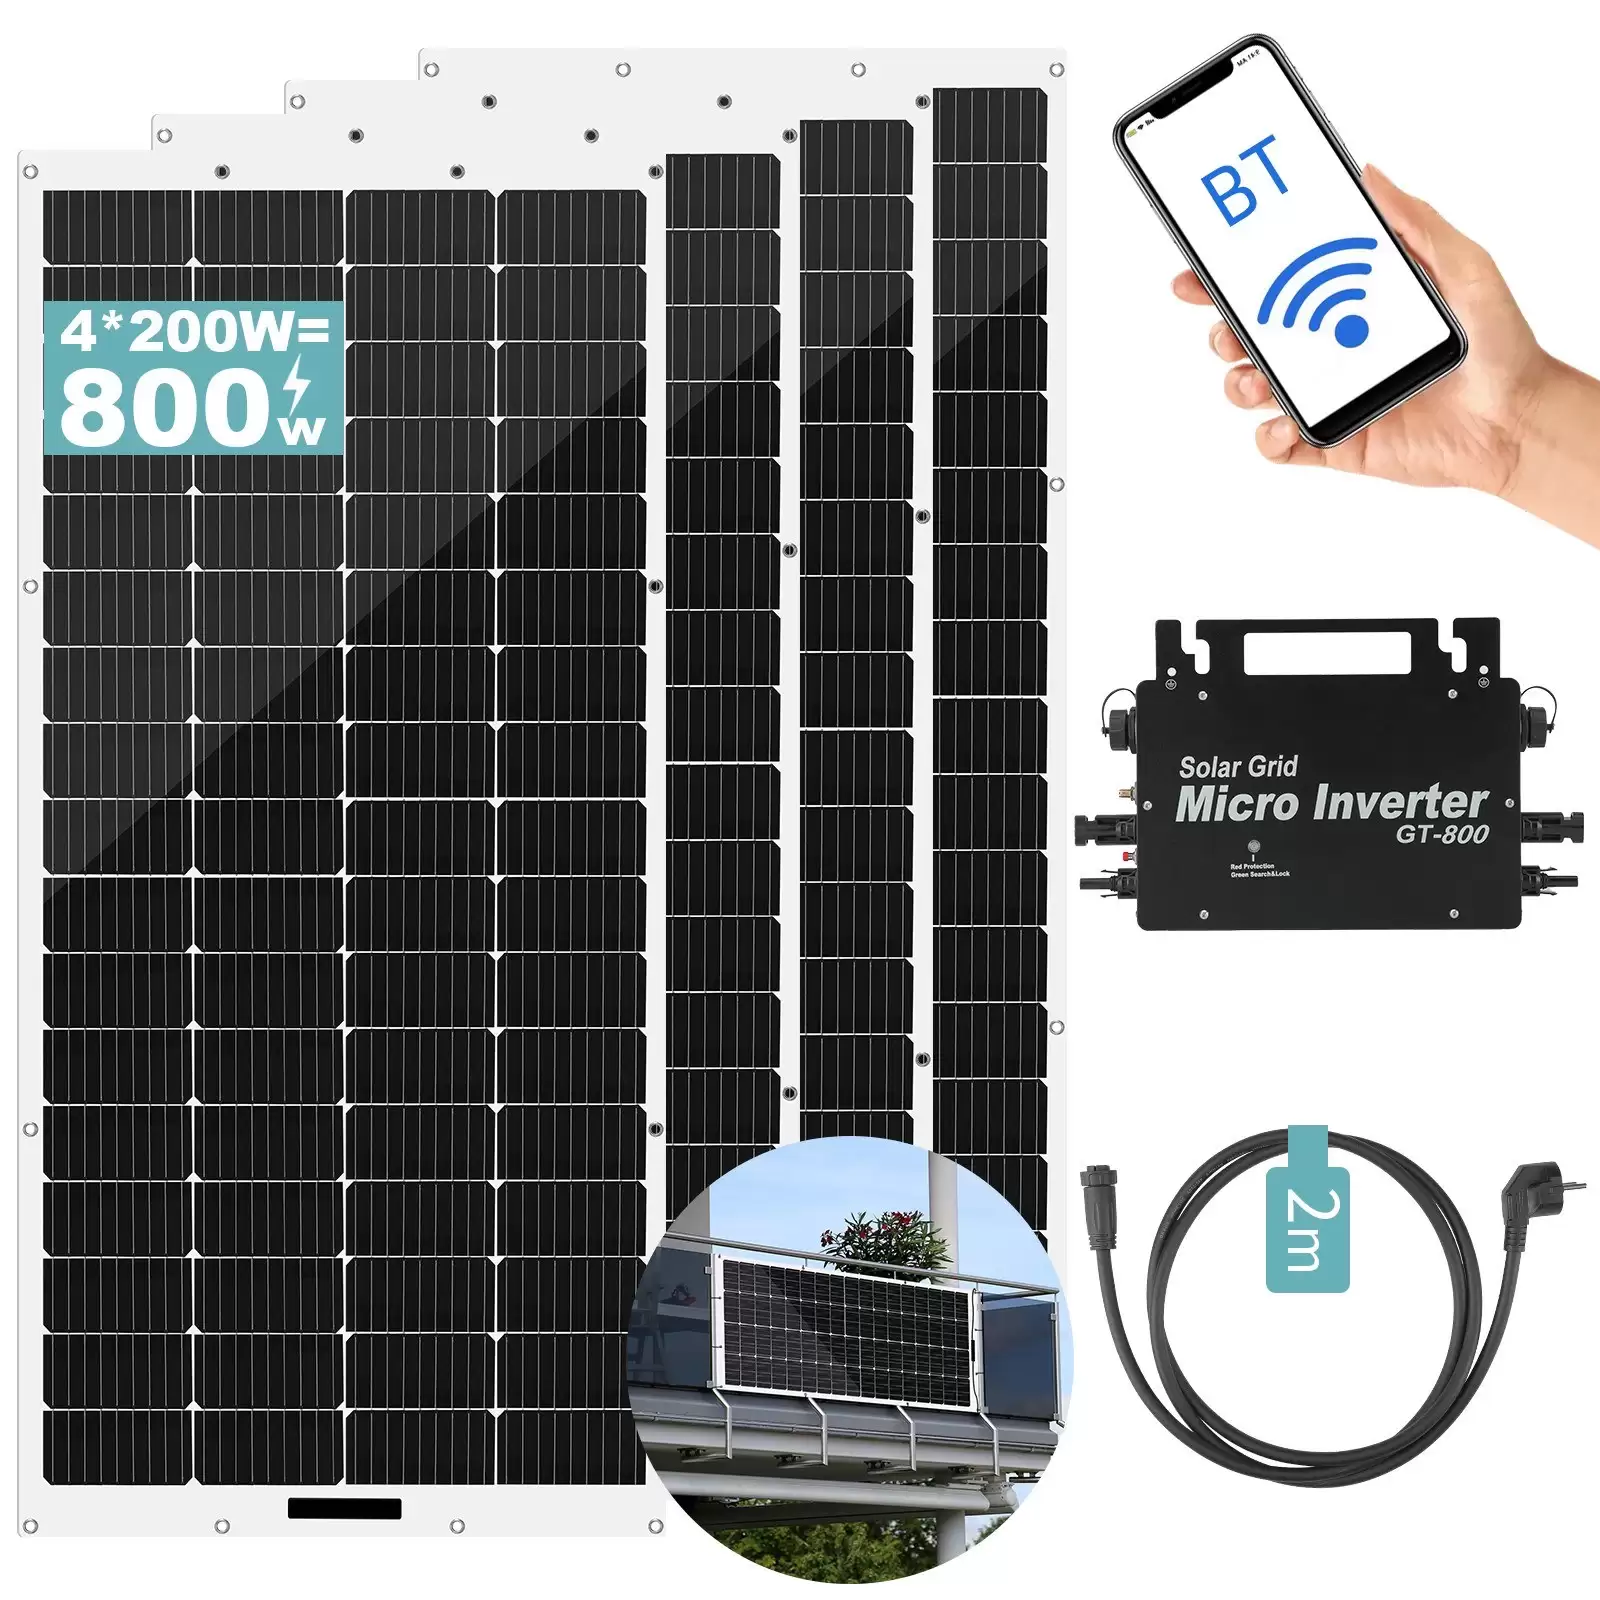 Pay Only $ 636.99 For Lanpwr 800w Balcony Power Plant With 4 X 200w Flexible Solar Panels At Cafago